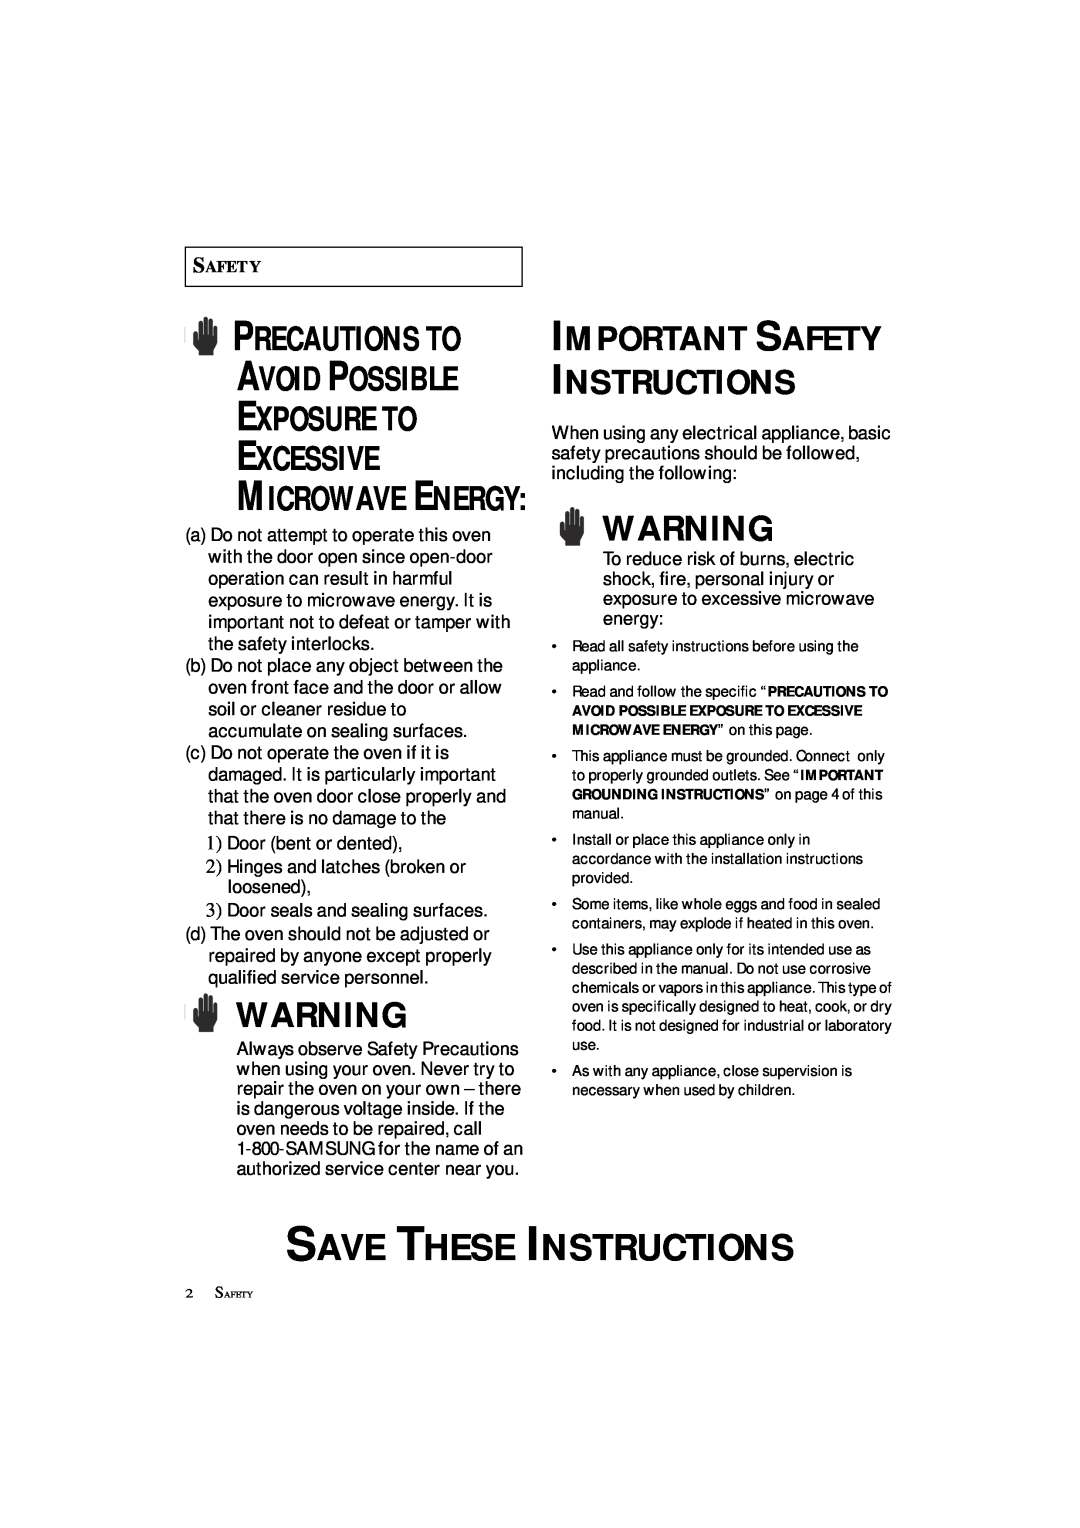 Samsung MS8899S manual Save These Instructions, Exposure To Excessive, Precautions To Avoid Possible, Microwave Energy 